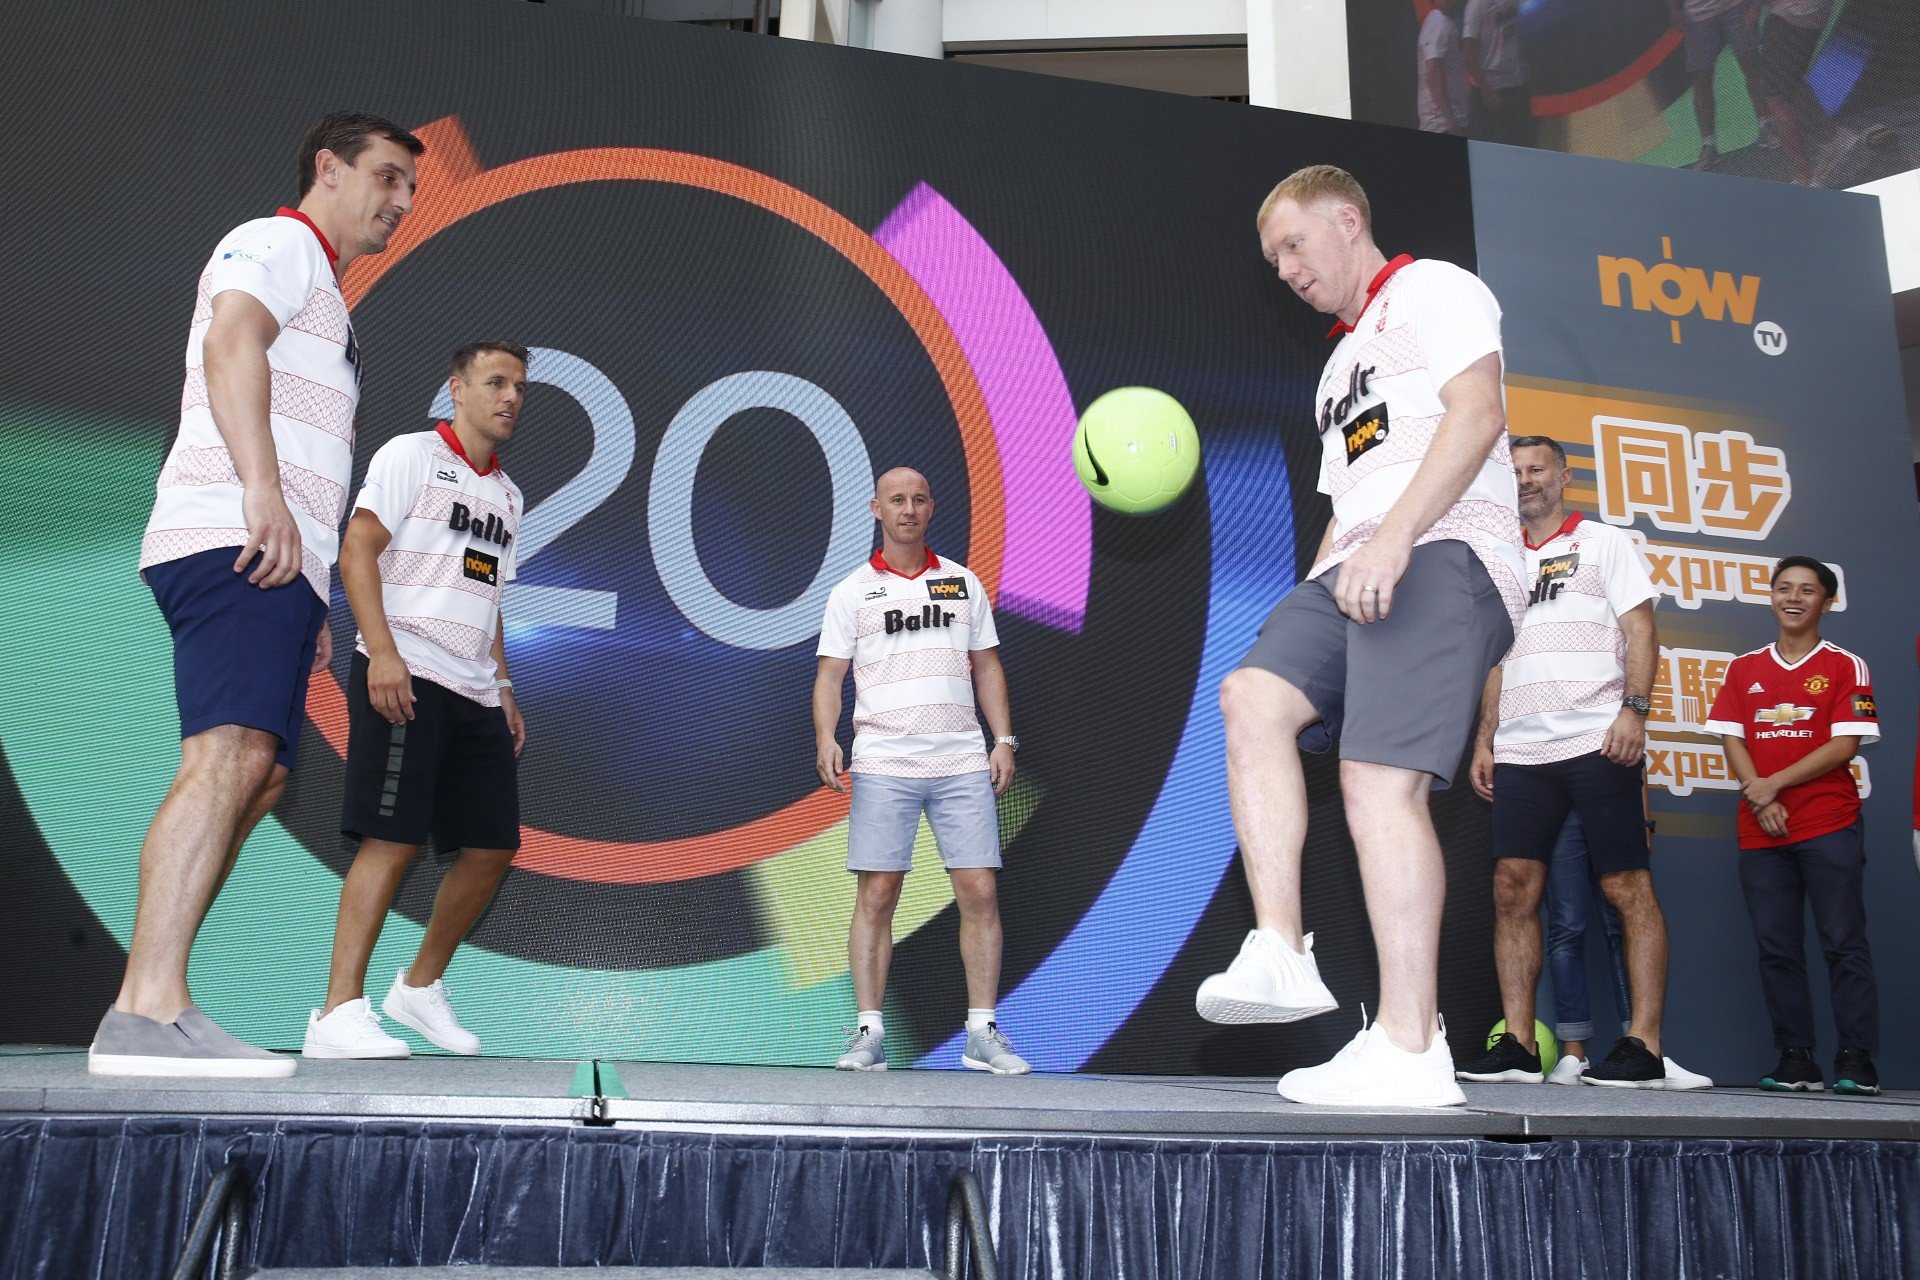 The Class of ’92 – Gary Neville, Phil Neville, Nicky Butt, Paul Scholes and Ryan Giggs – take part in a game of keepy-uppies at a promotional event at Olympian City 2 for Now TV and the new “Ballr” interactive football app. Photo: Now TV